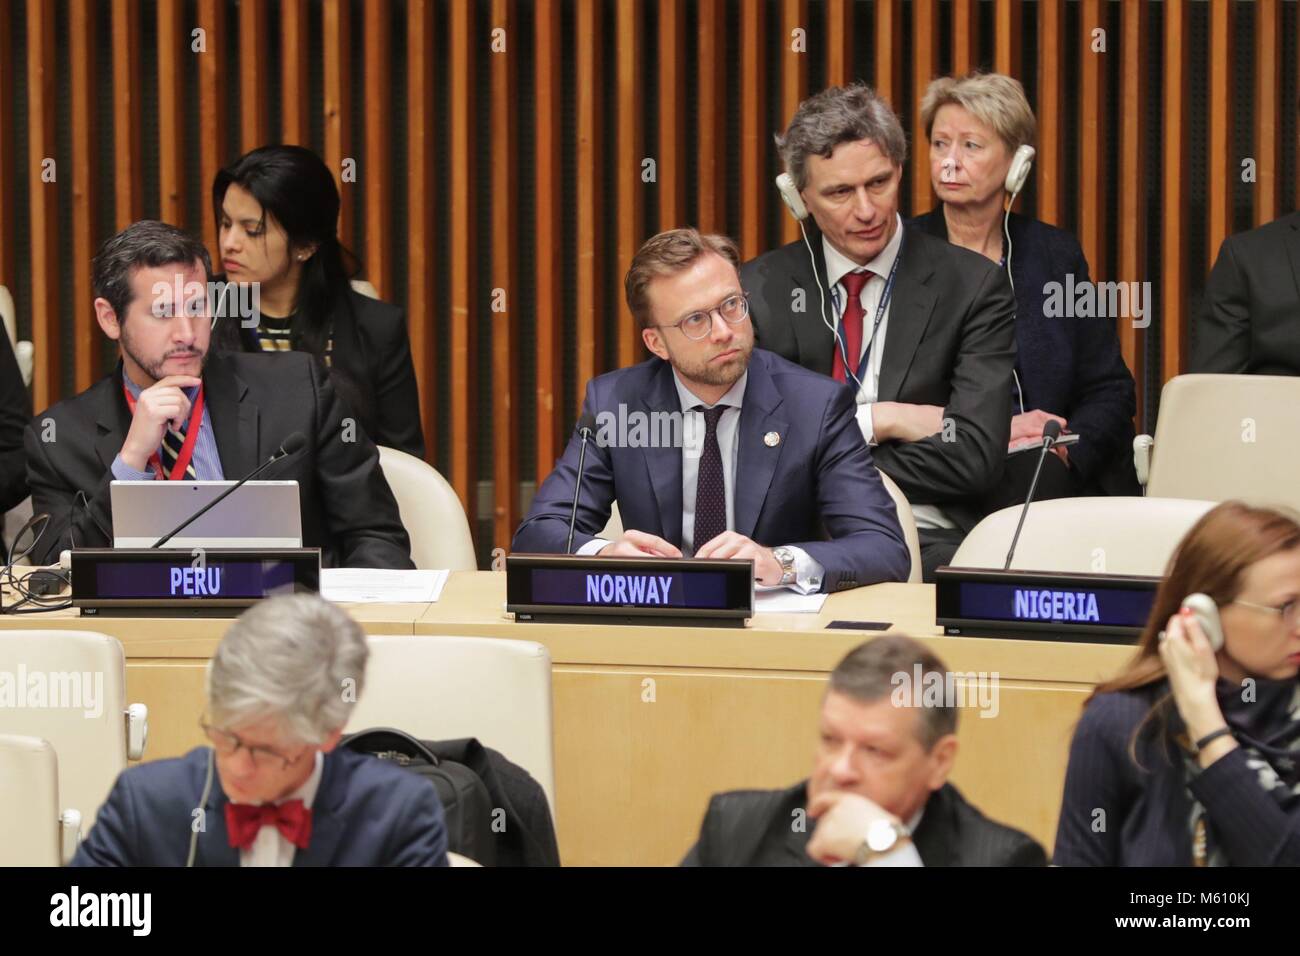 United Nations, New York, USA, February 27 2018 - Nikolai Astrup, Norwegian Development Minister During the Economic and Social Council Operational Activities for Development and Repositioning the United Nations Development System to Best Deliver for People and Planet today at the UN Headquarters in New York. Photo: Luiz Rampelotto/EuropaNewswire *** Local Caption *** 00006118 | usage worldwide Stock Photo